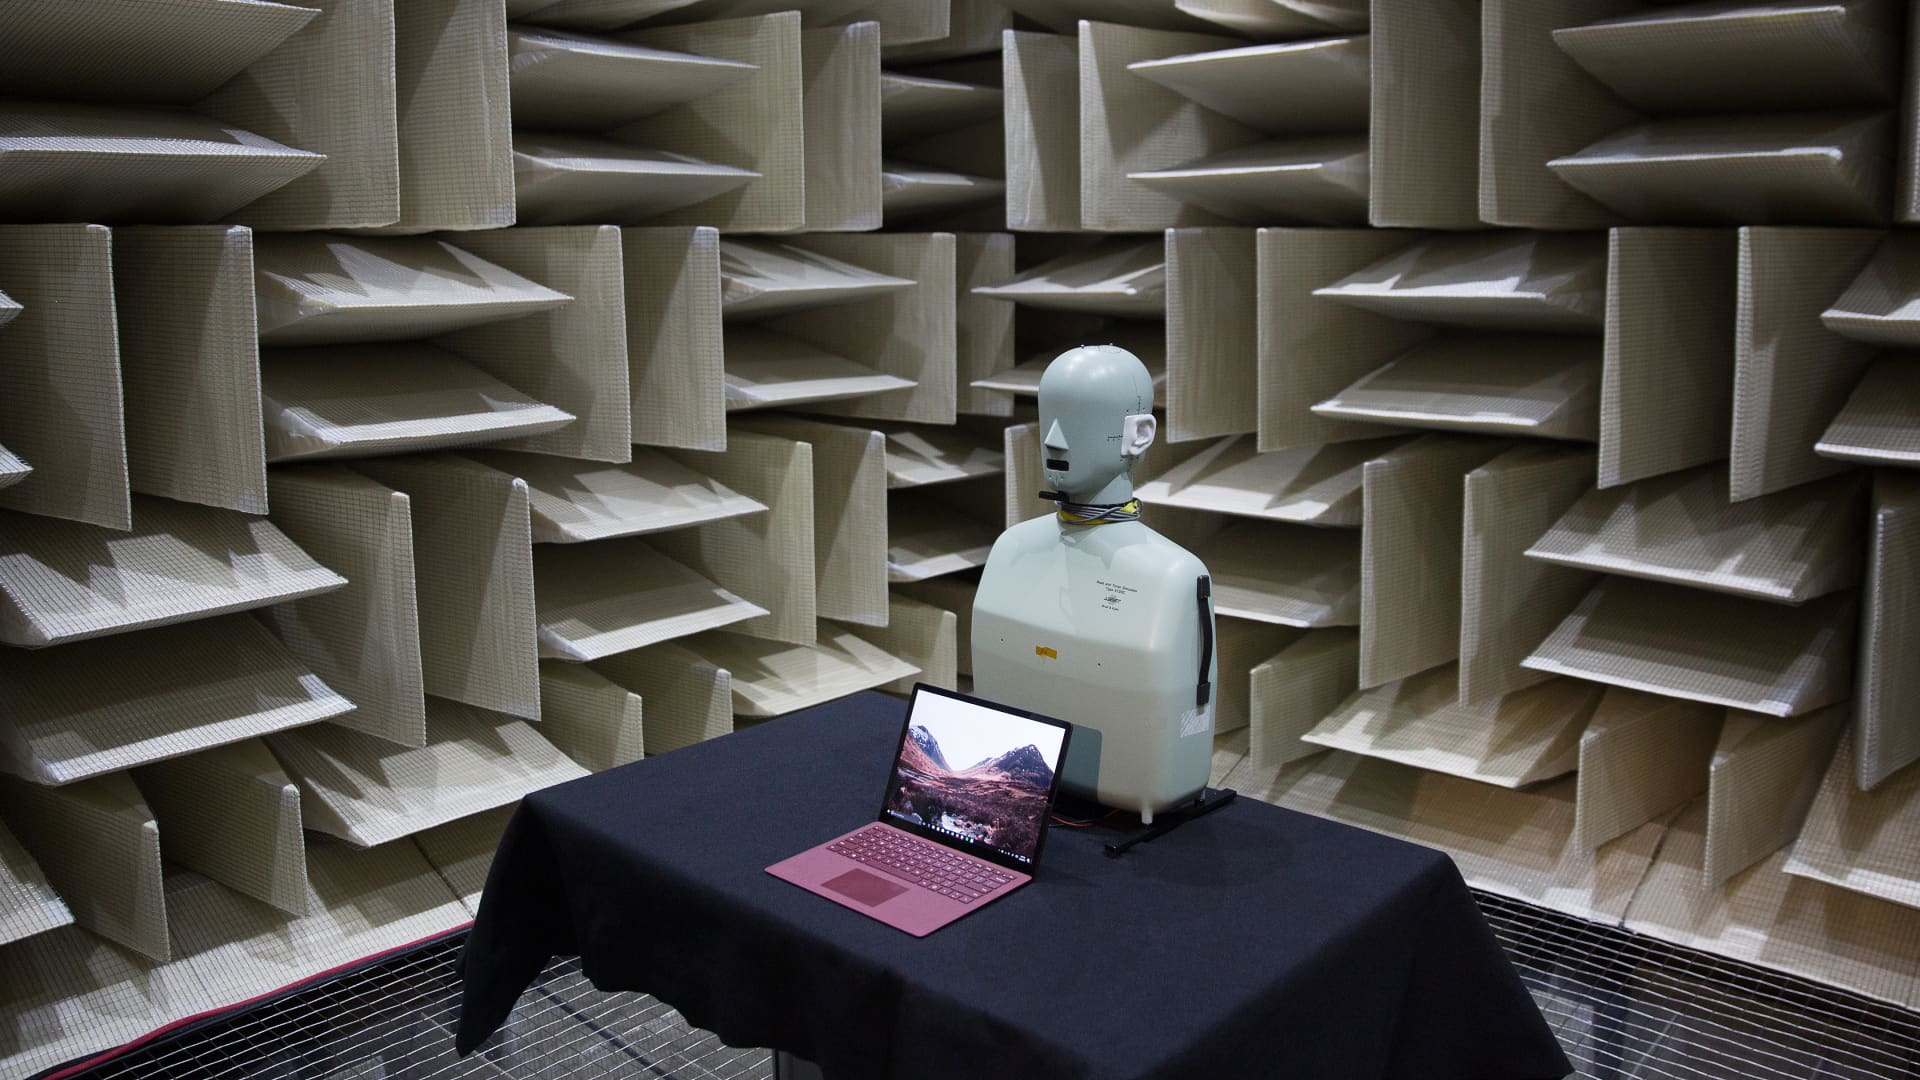 A Microsoft Surface Laptop computer sits in a soundproof anechoic chamber, used for development of the device's speakers, at the hardware lab of the Microsoft Corp. main campus in Redmond, Washington, on April 20, 2017.